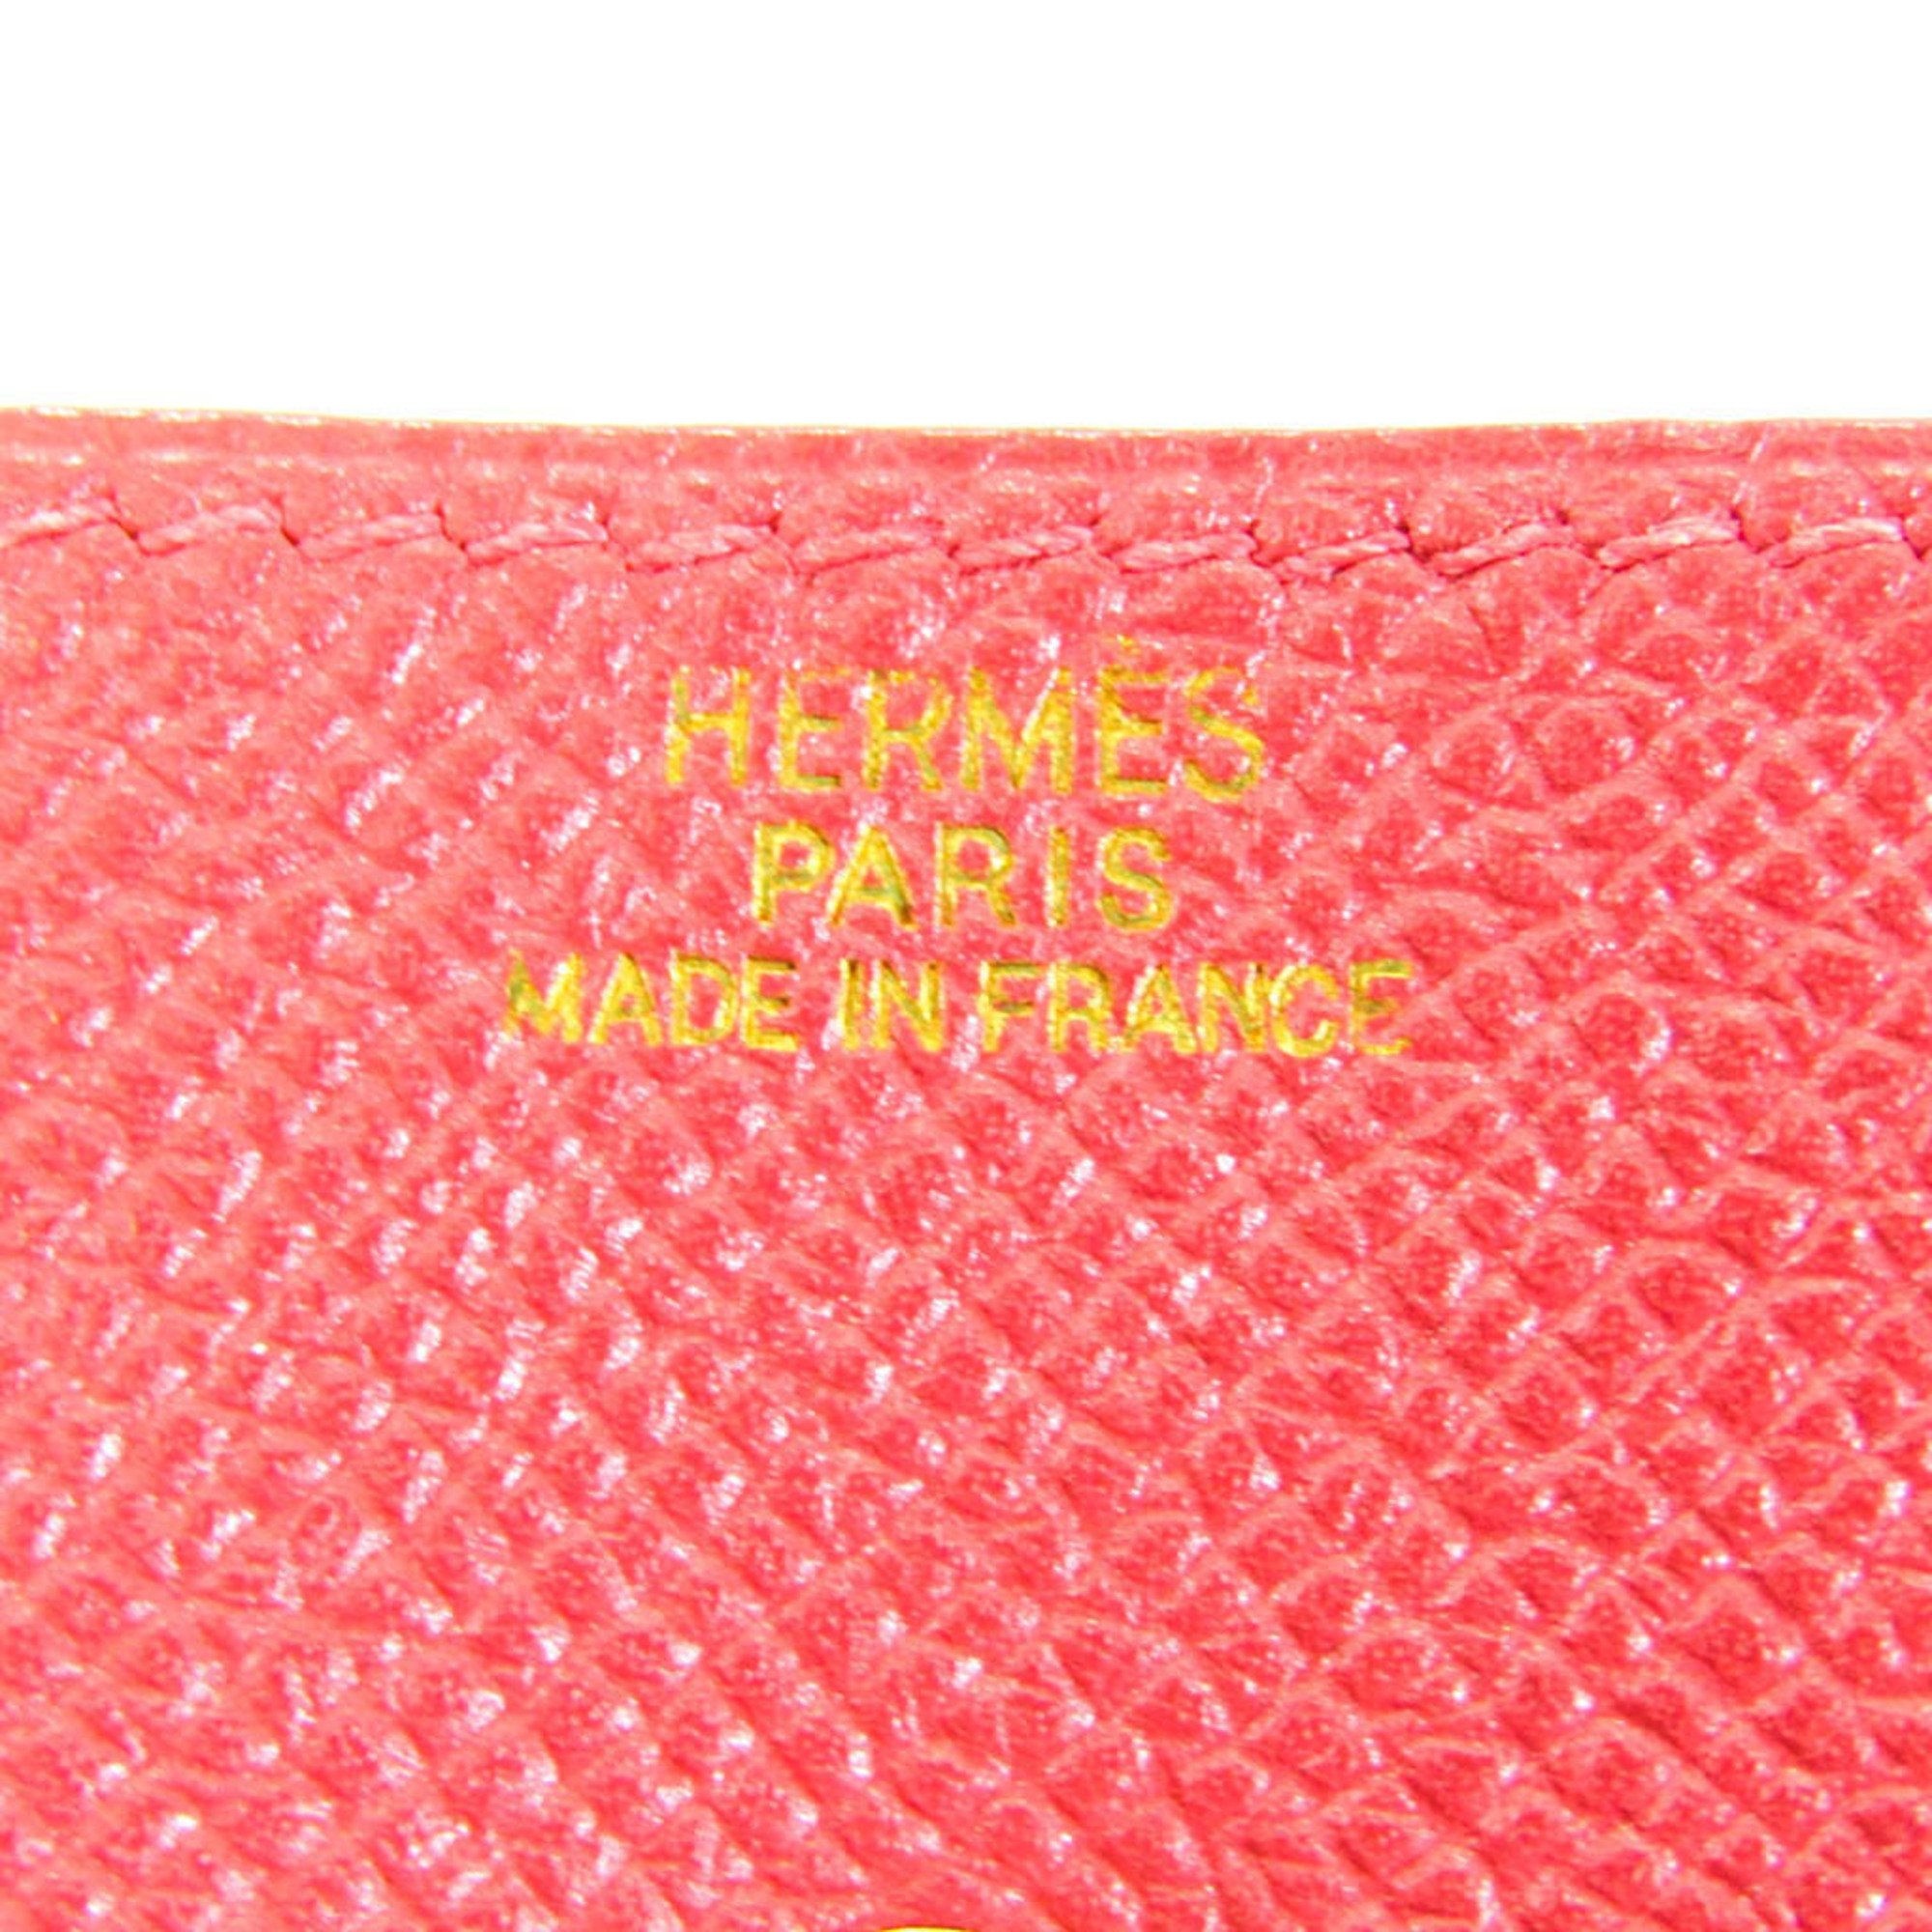 Hermes LE 24 Women's Epsom Leather Coin Purse/coin Case Red Color